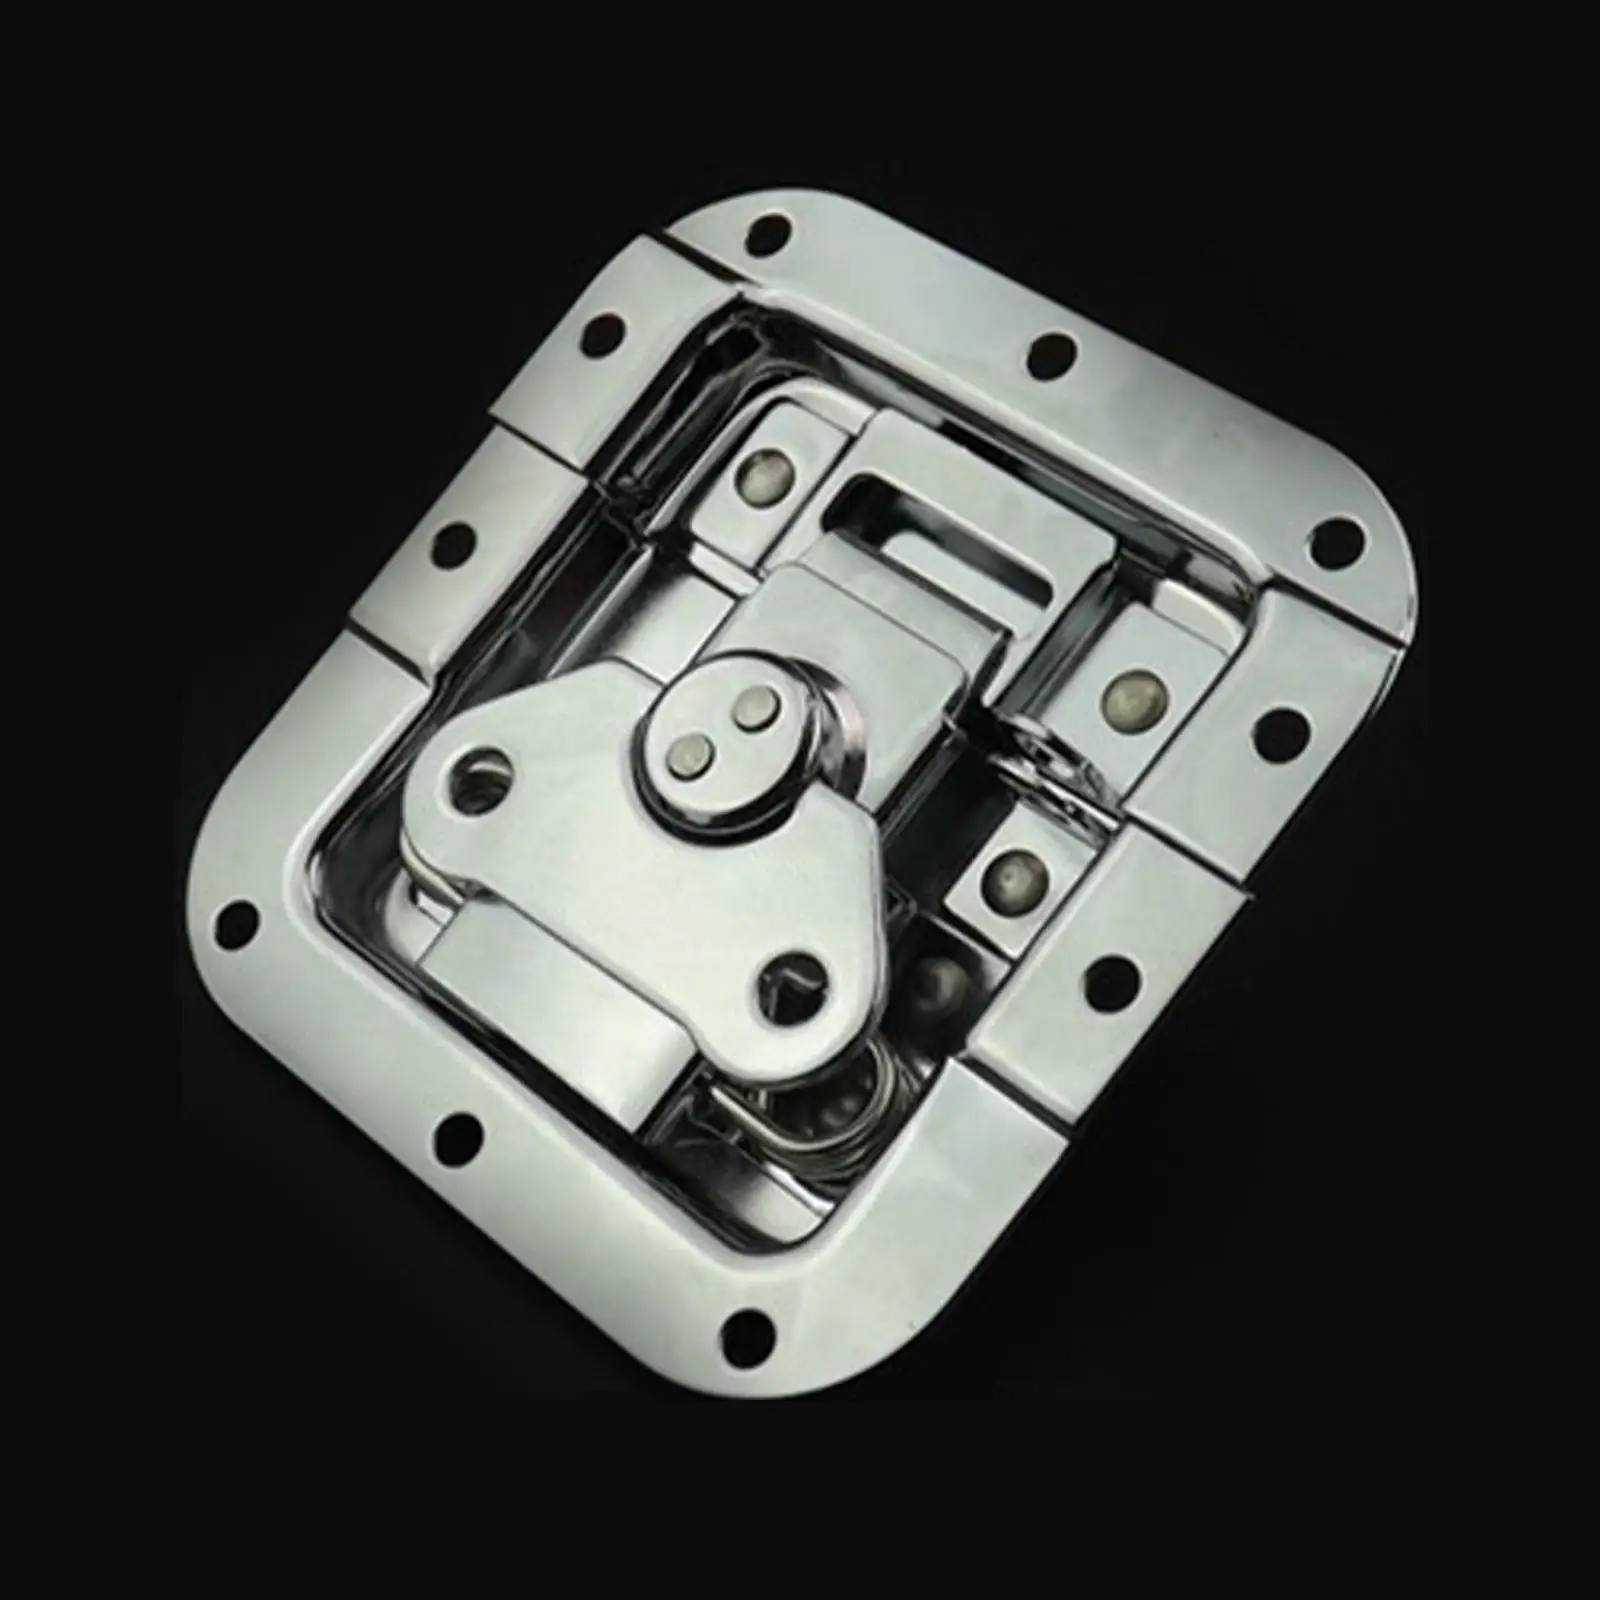 Spring Latch Sliver Exquisite Appearance Accessories Tool Latch Spring Loaded Toggle Latch for Chest Box Case Suitcase Hardware